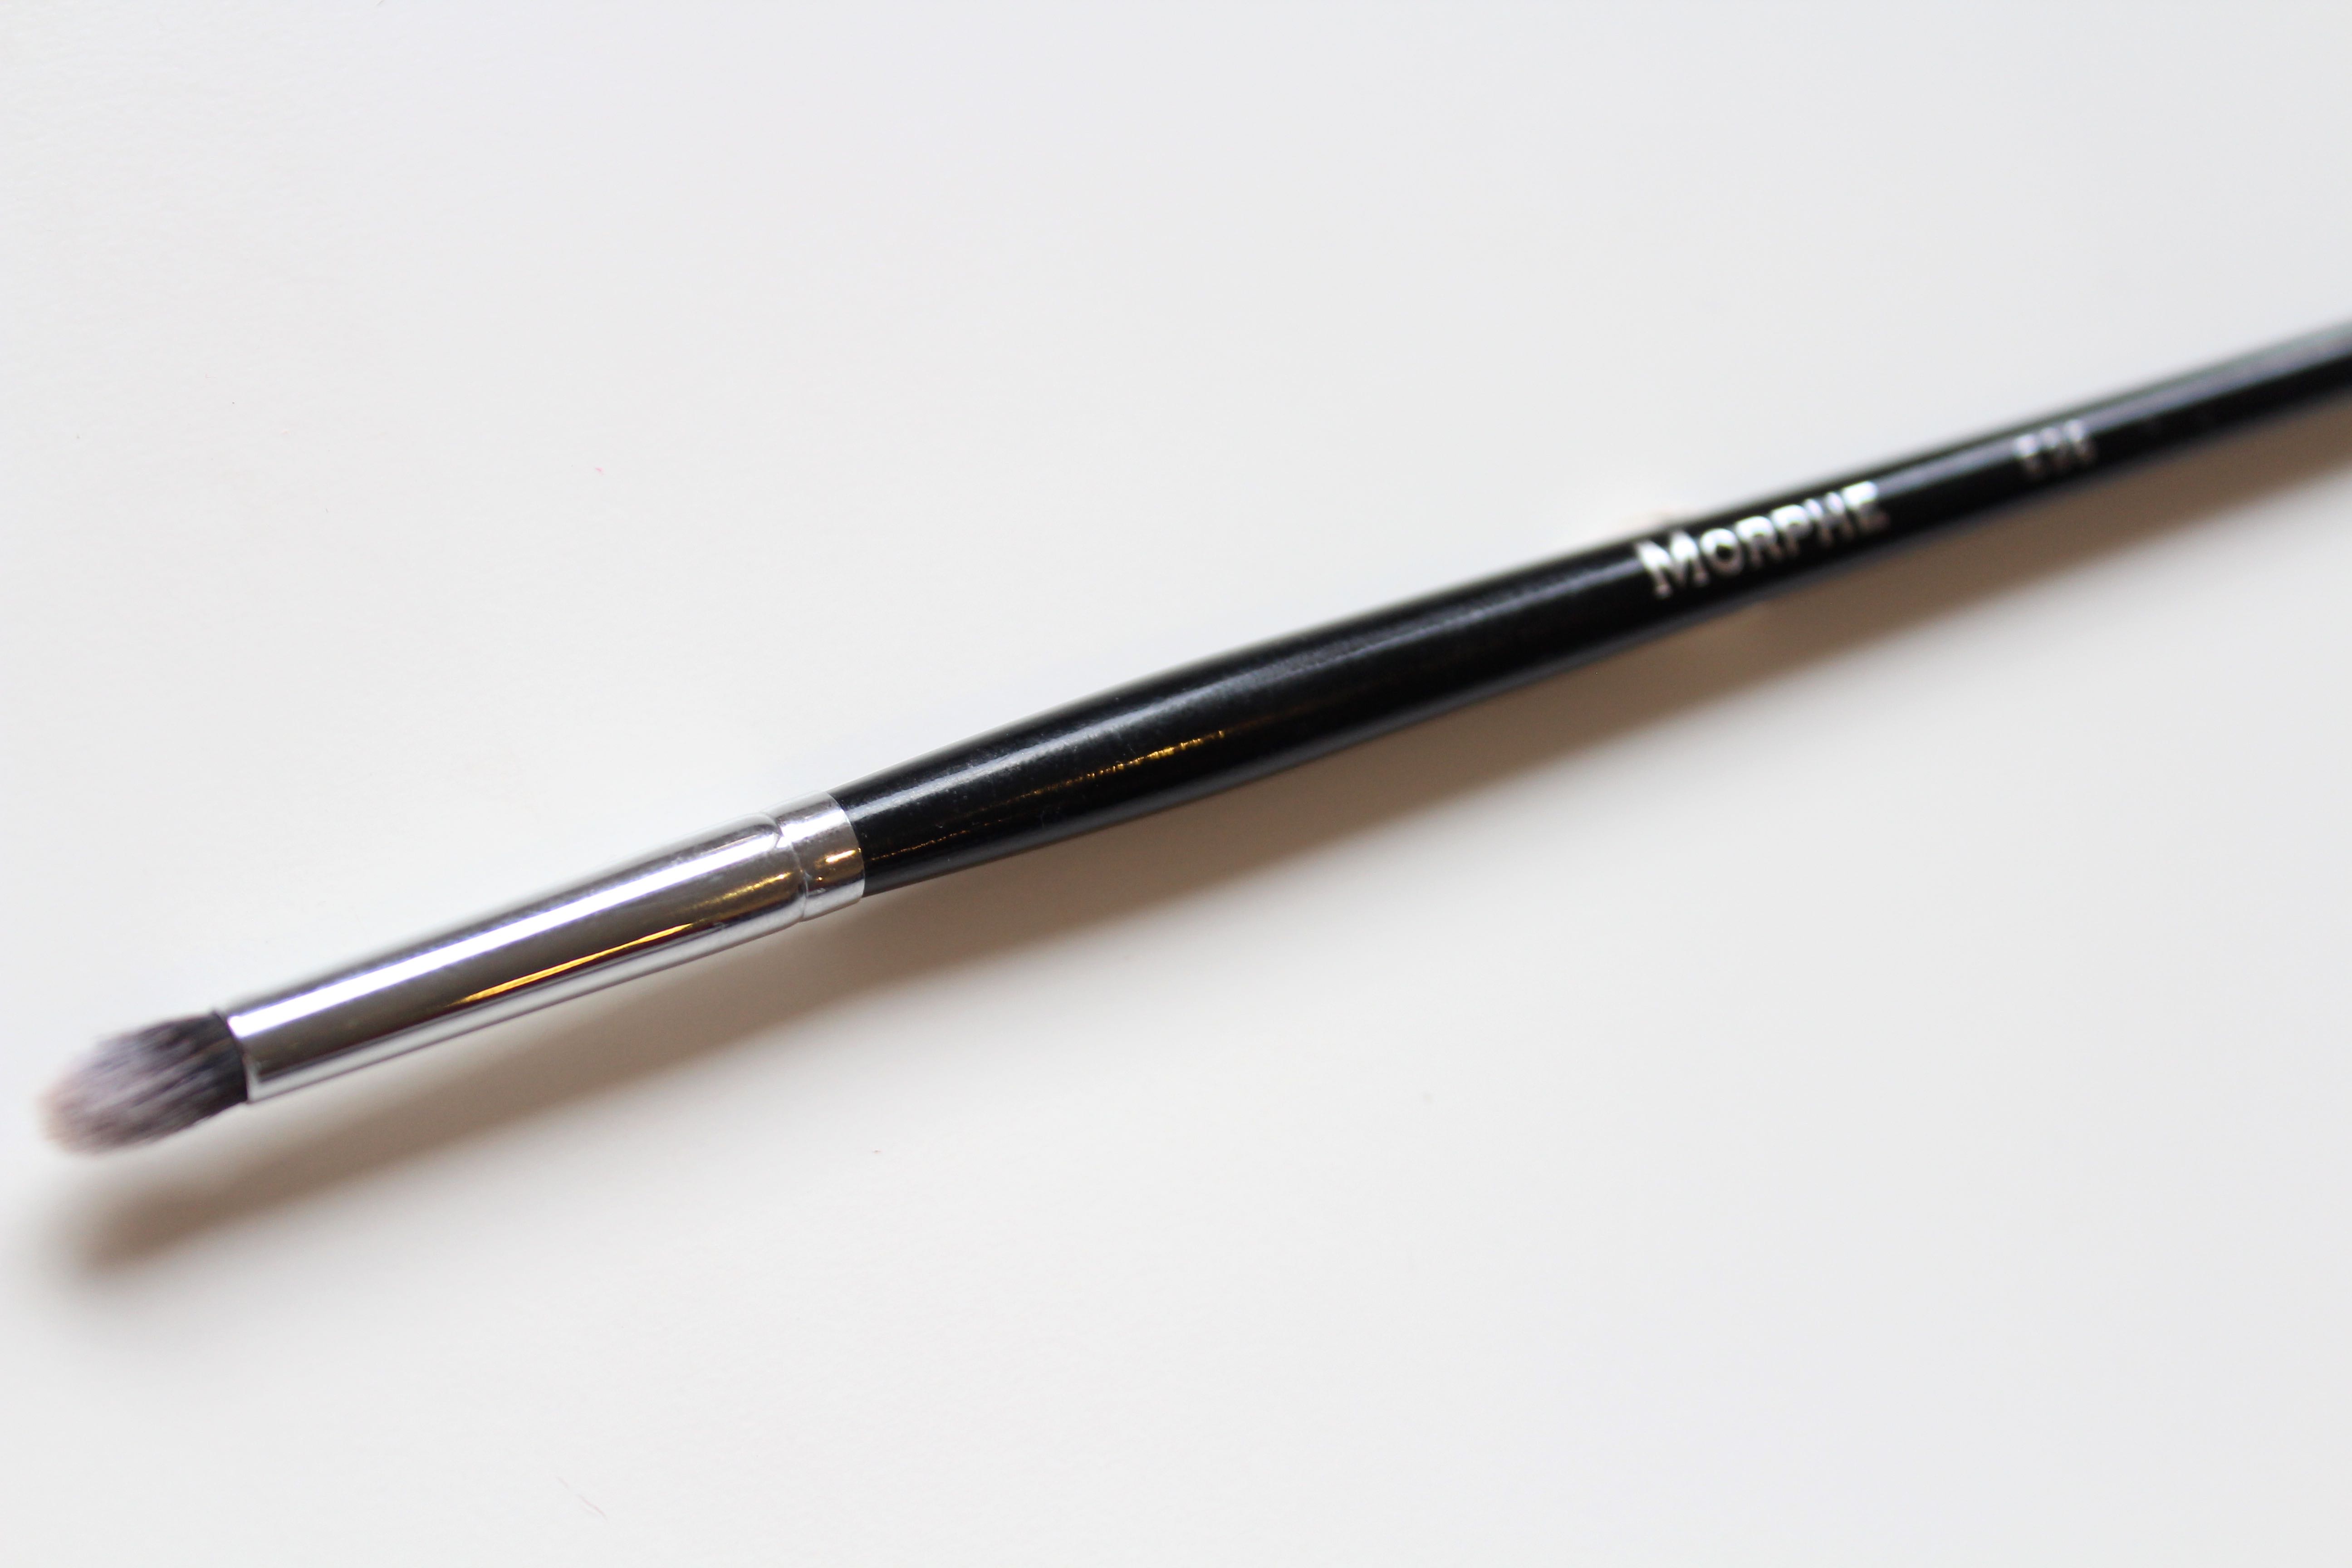 Morphe E36 Detail Crease Brush review by Facemadeup.com